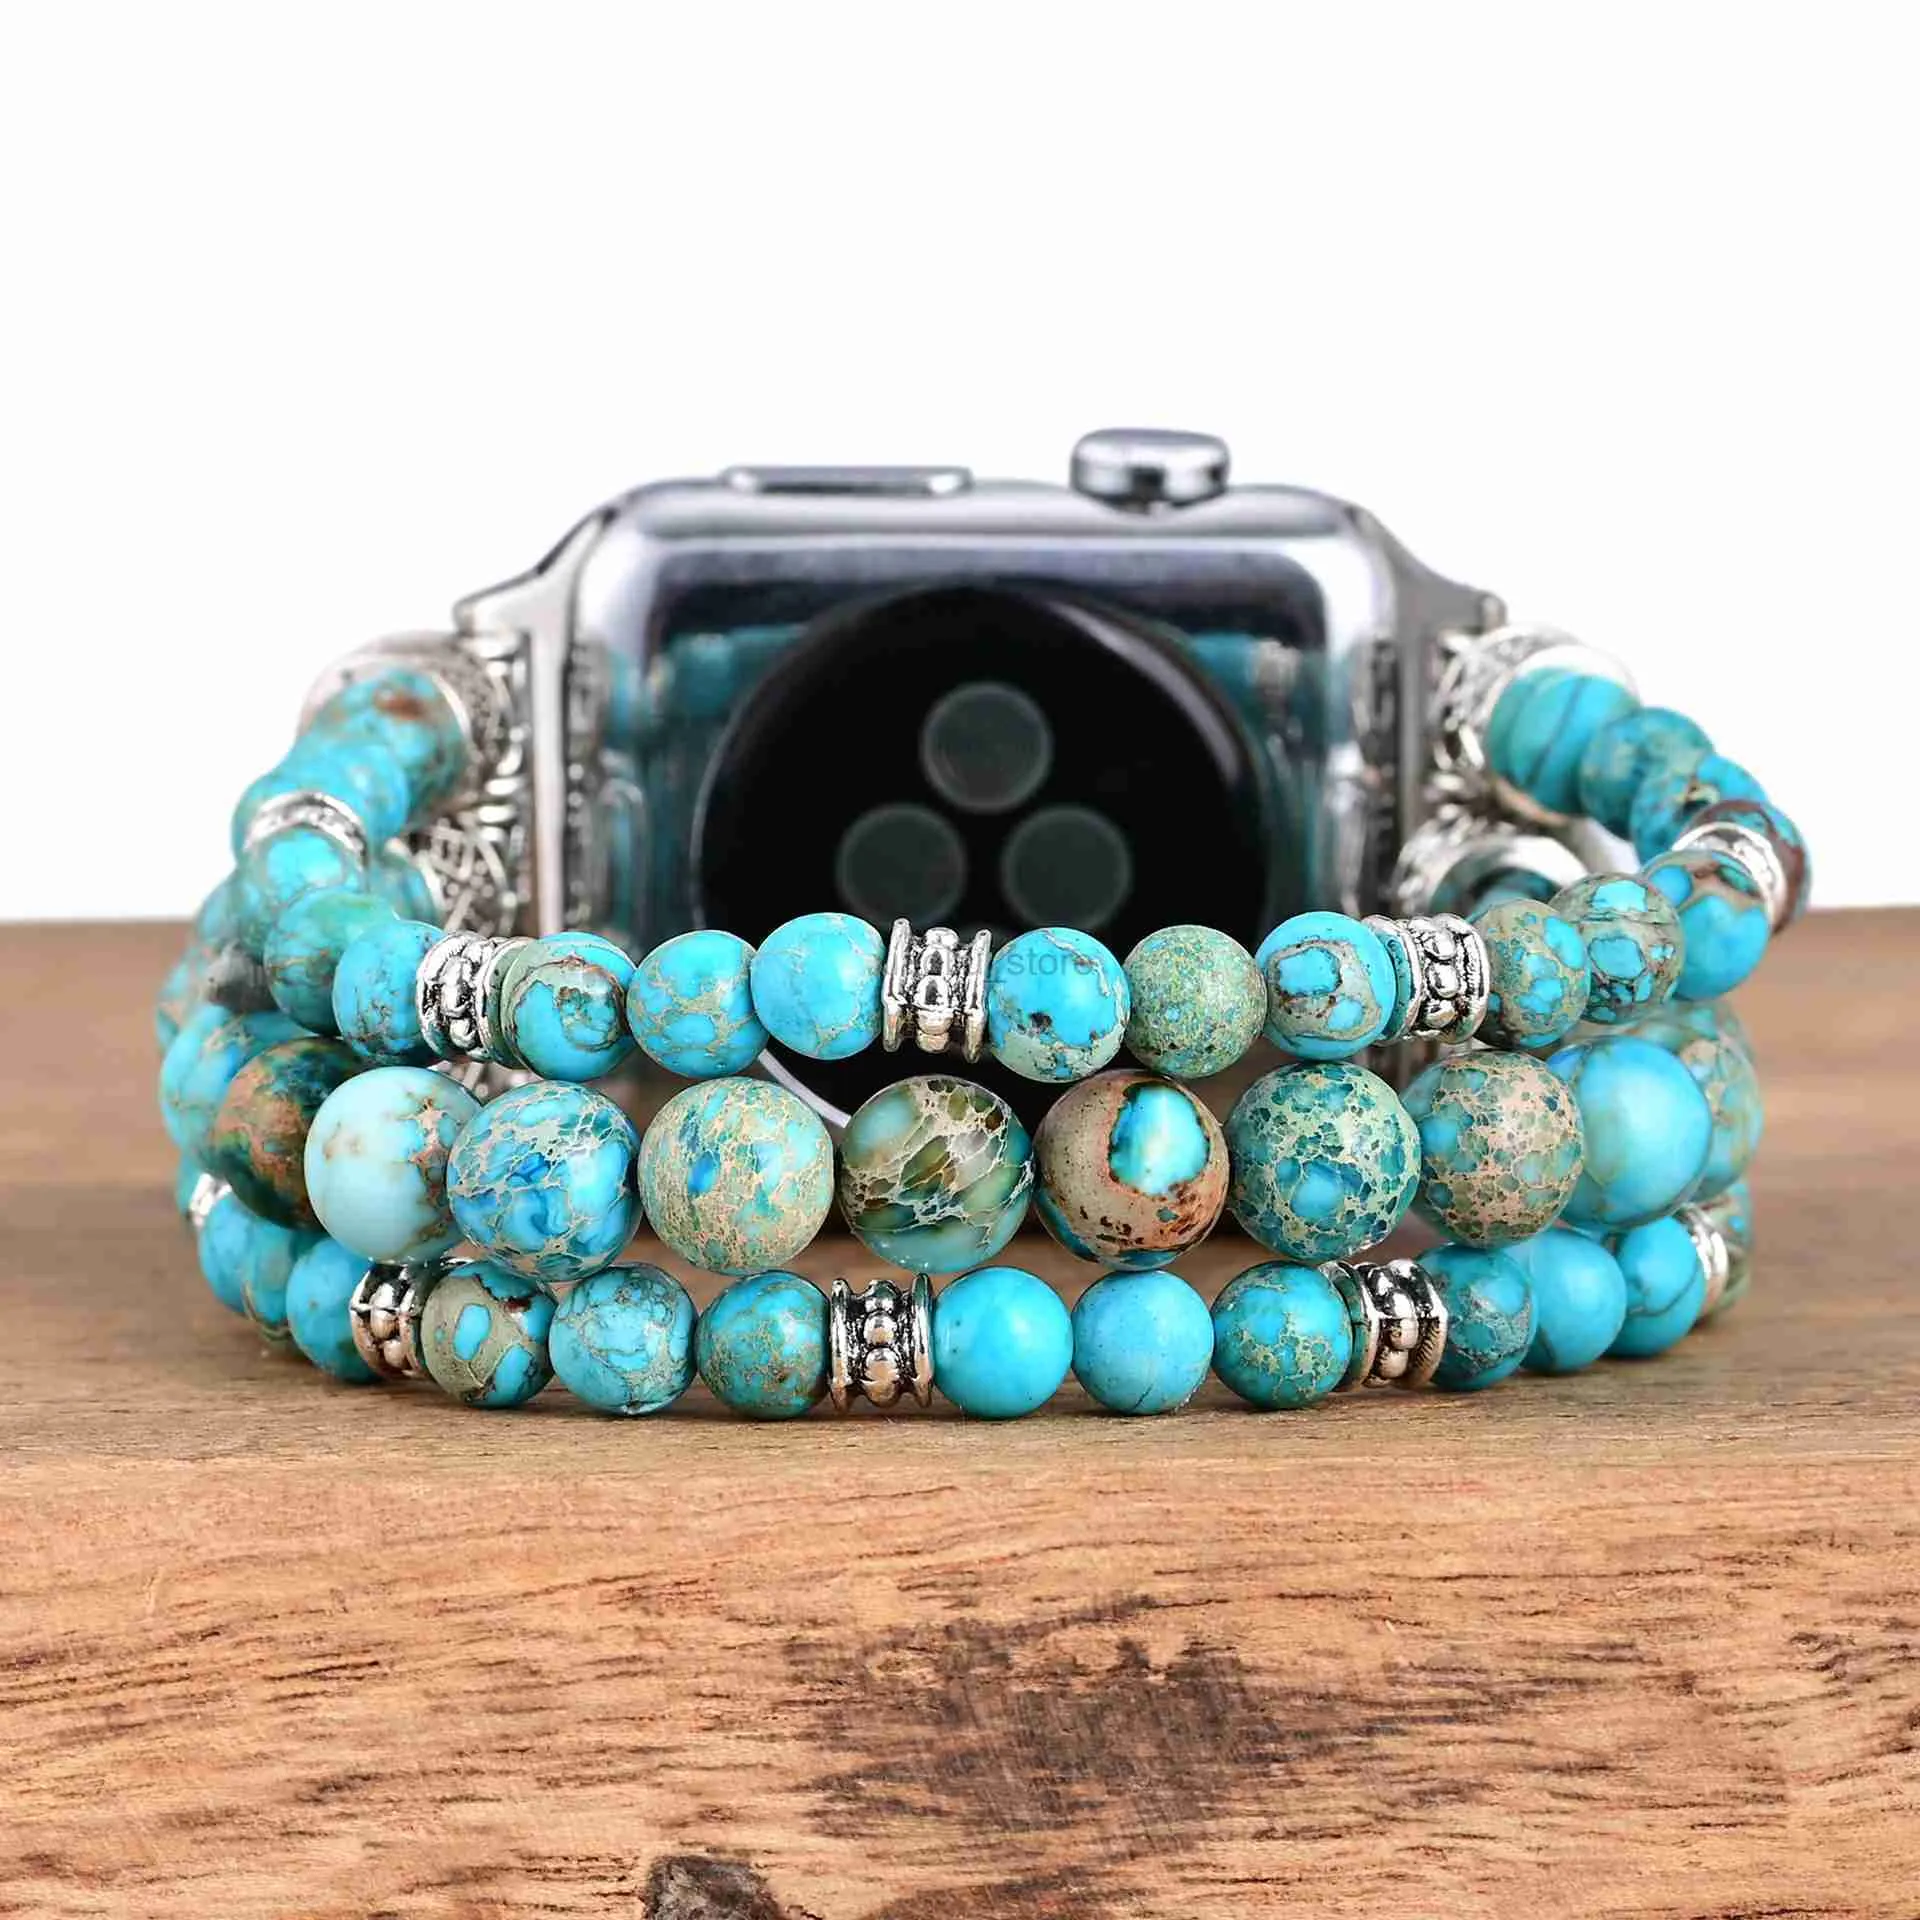 Band Böhmen Luxury Purple Flower Emperor Turquoise Stone For Watch Band 41mm 45mm 44mm 42mm 40mm 38mm Women Wristband Iwatch WatchBand Accessories 2438